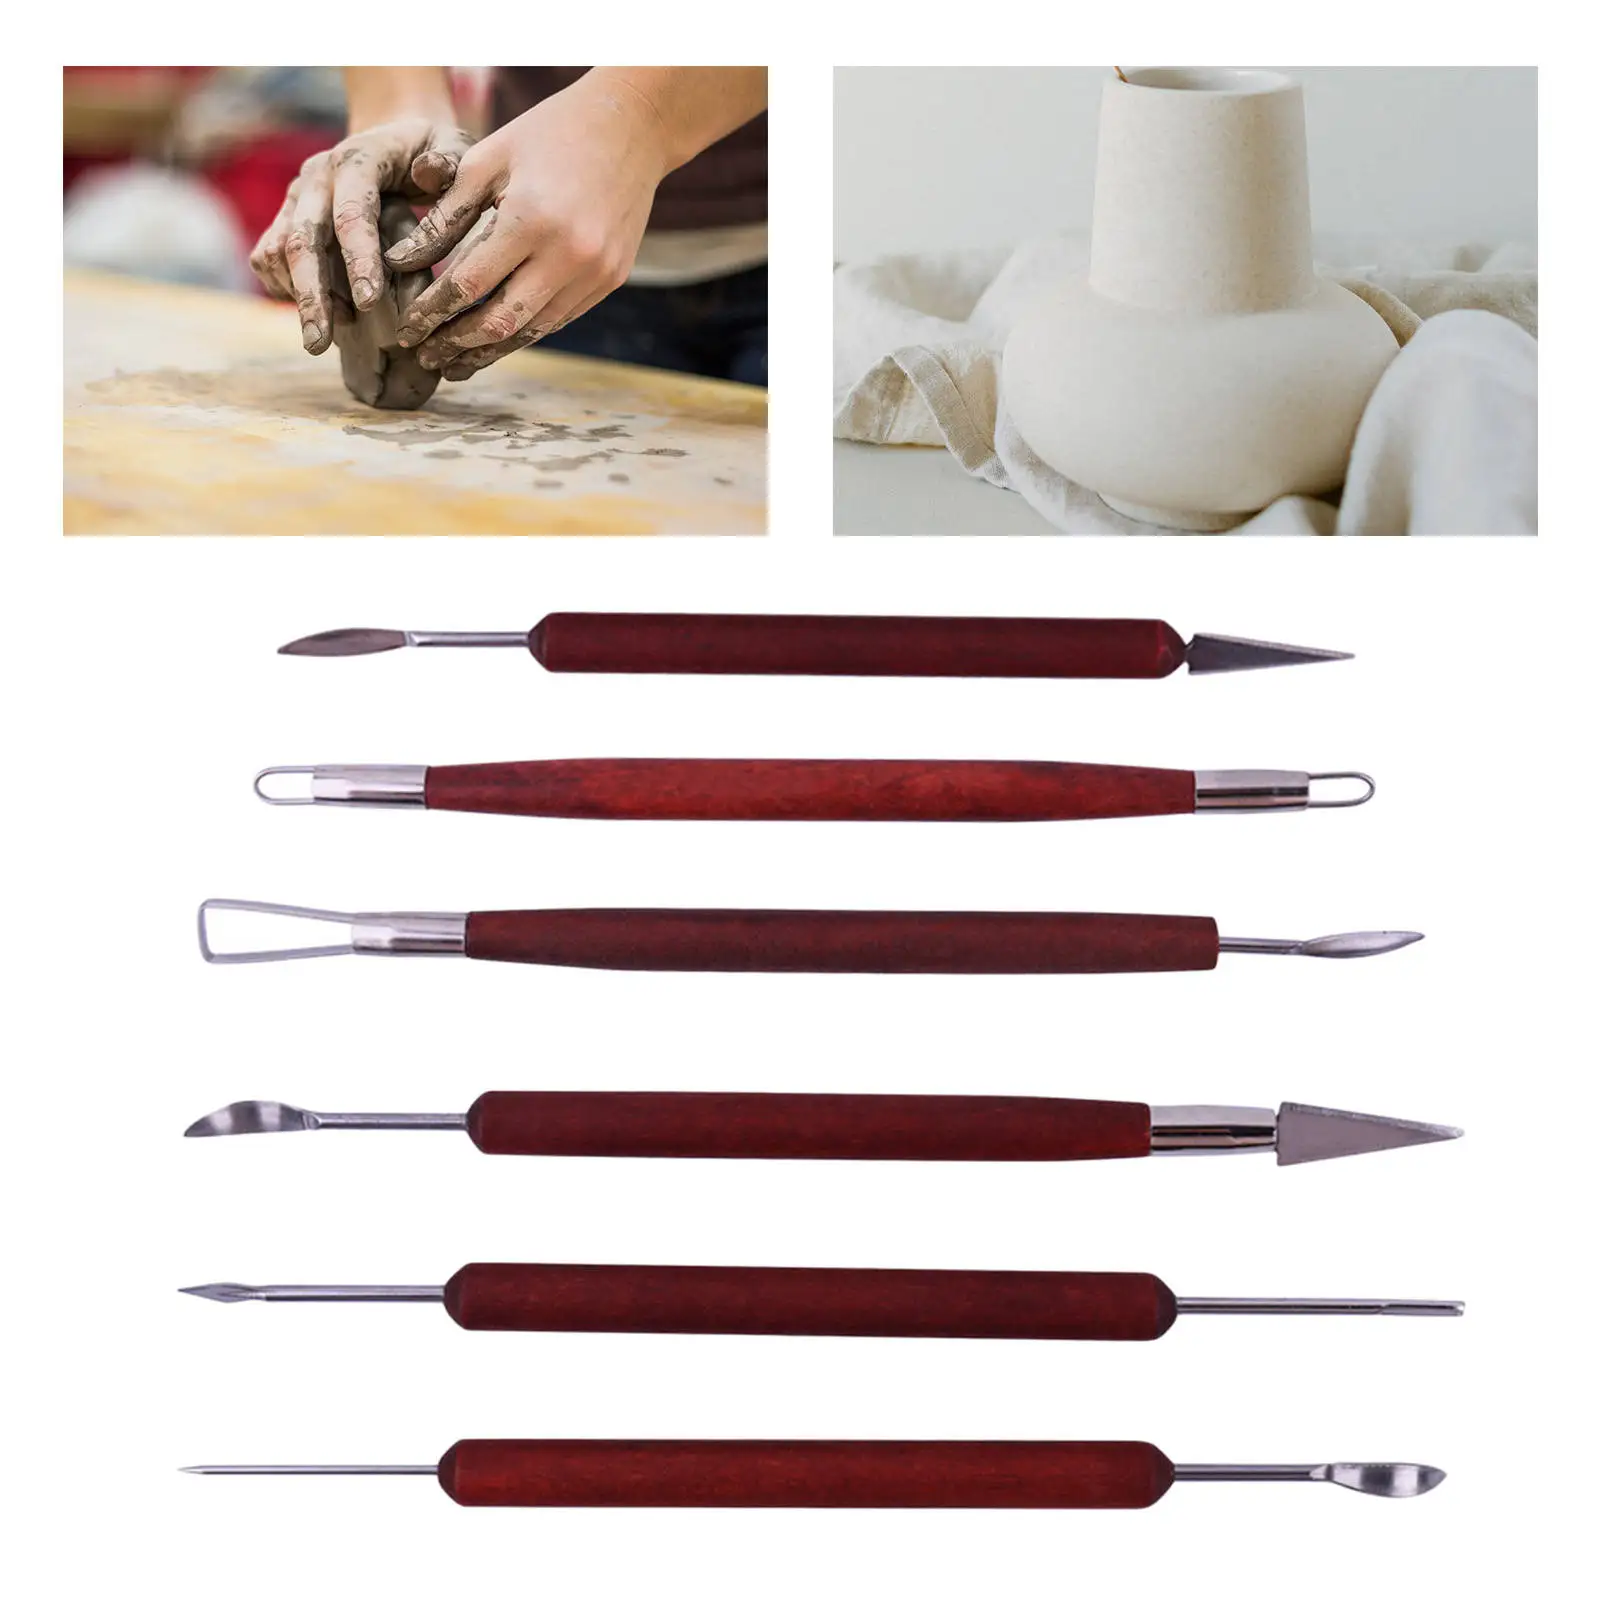 6 Pcs/Set Pottery Clay Sculpting Tools Kit Double-Ended with Wooden Handle Wax Carving Tool Ceramic Modeling for Shapers Student